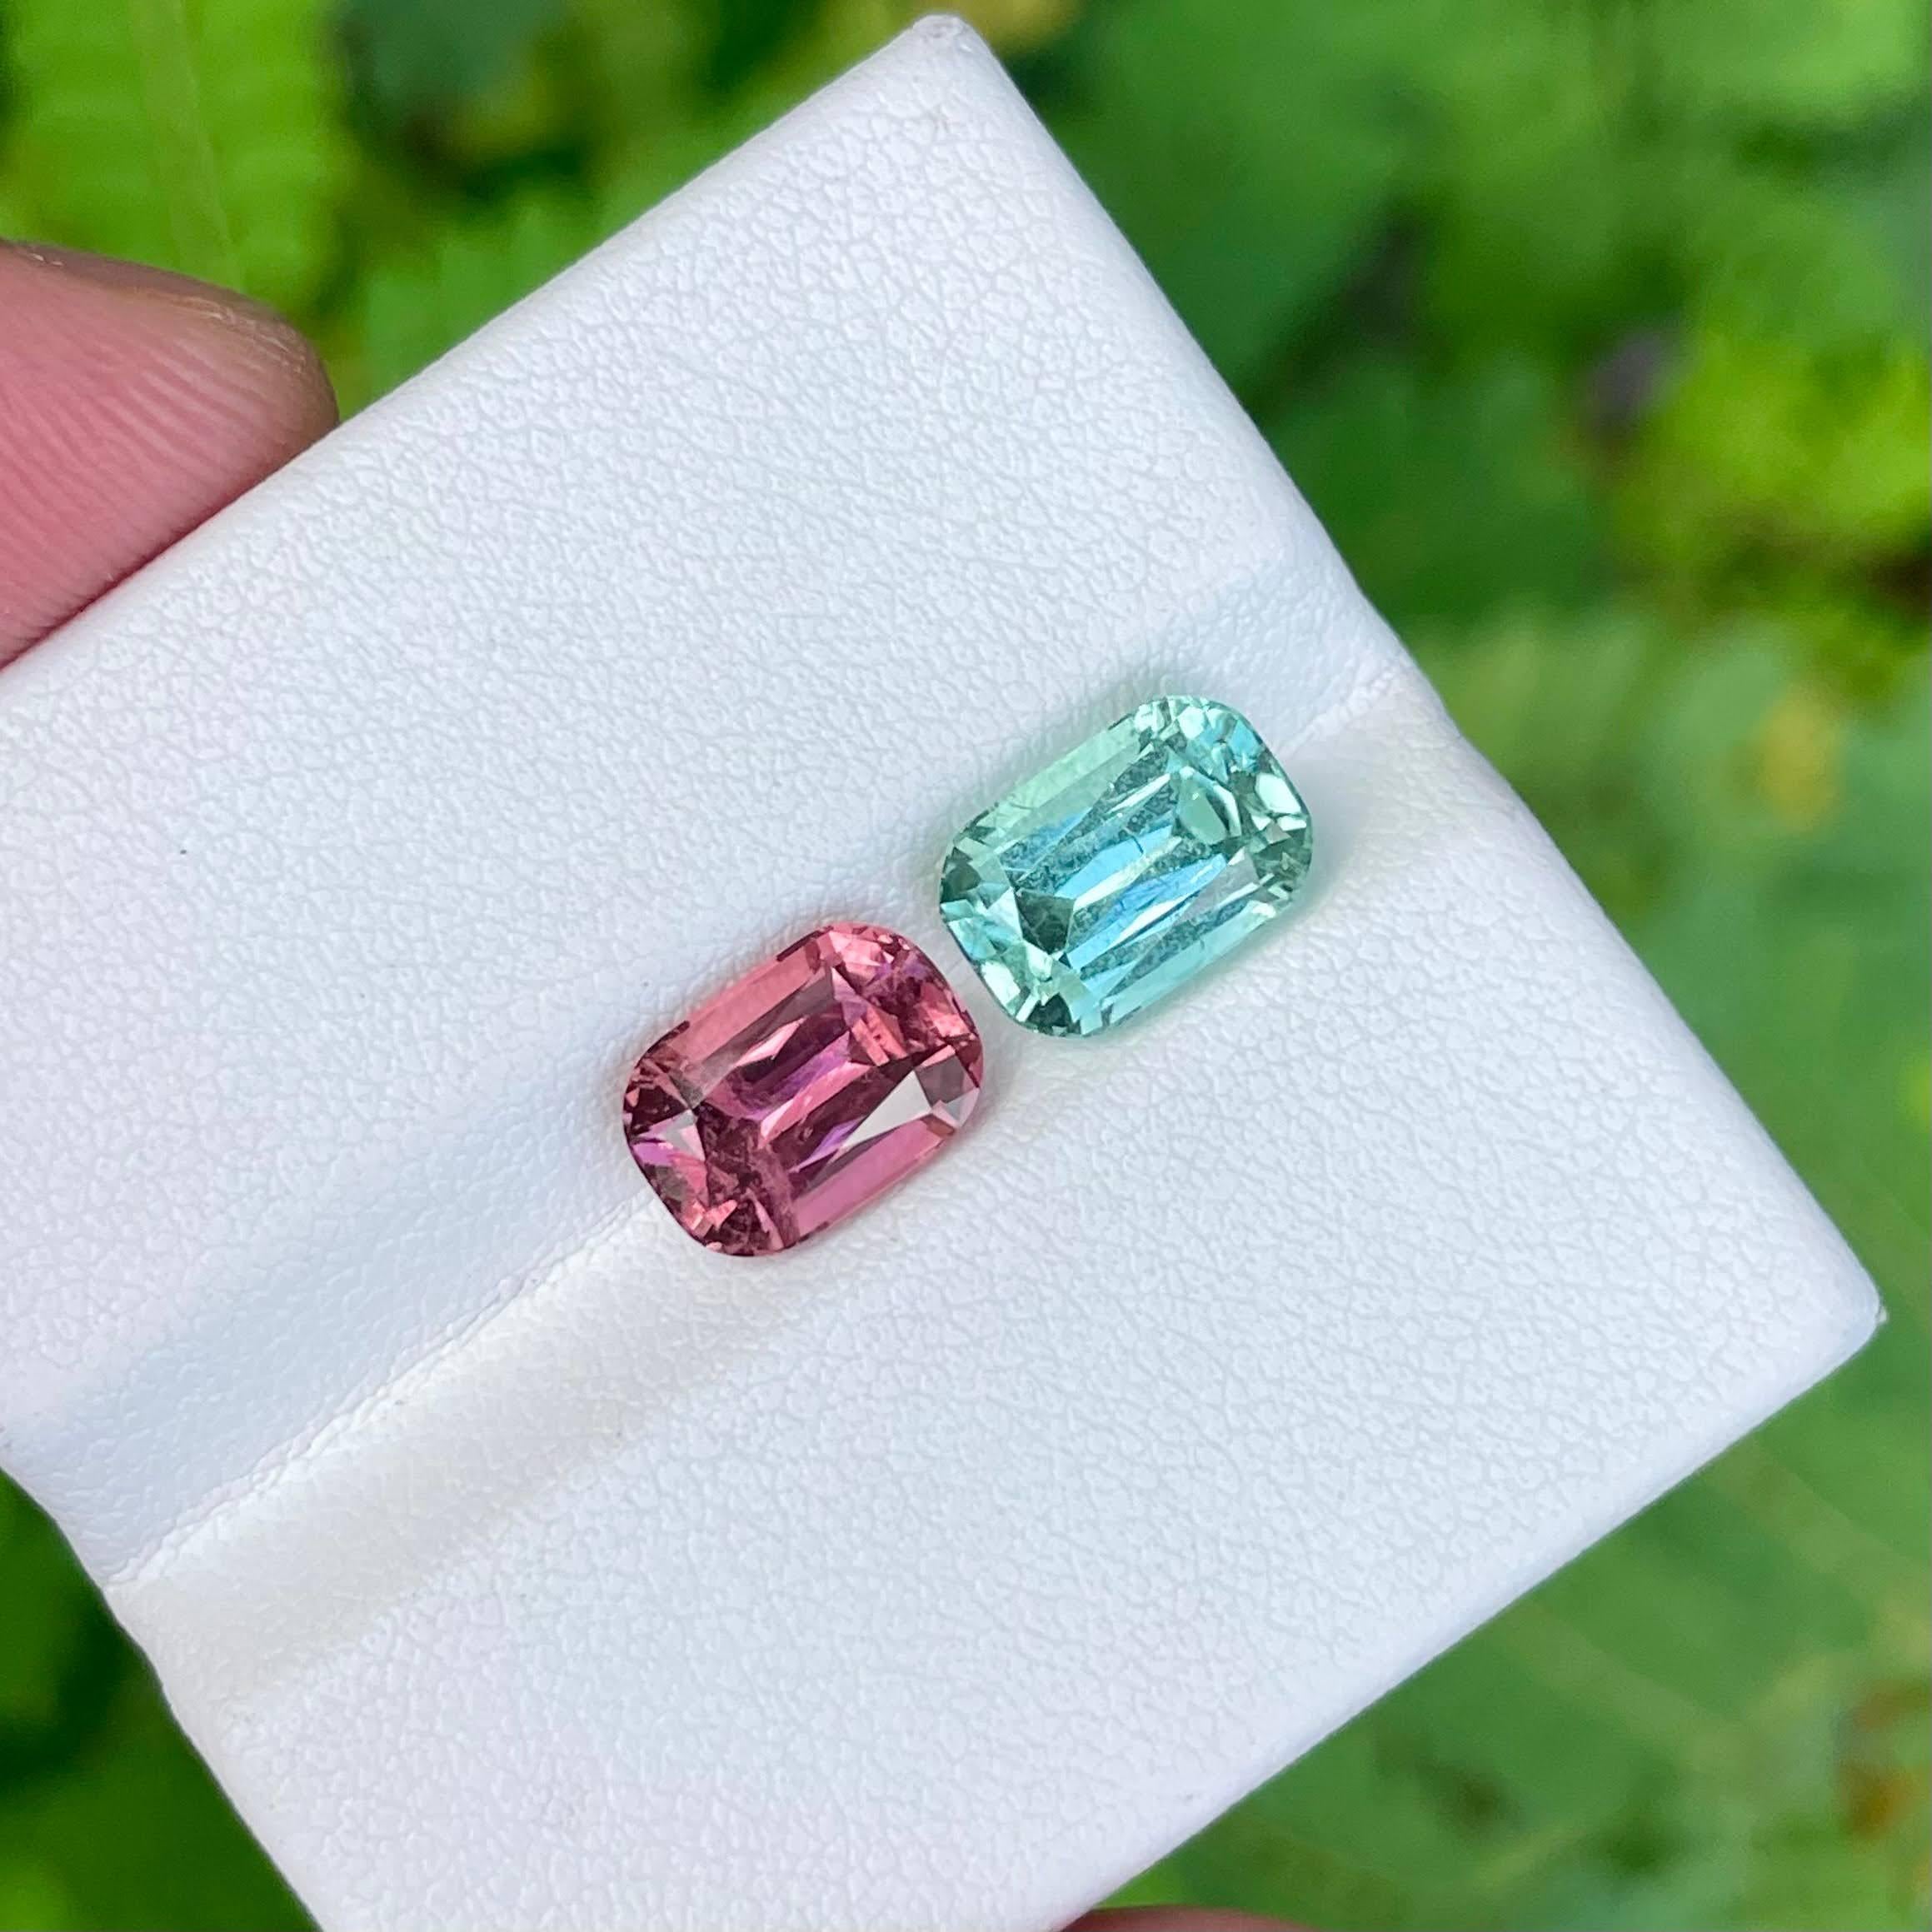 eafoam 
2.75 carats 
9.37x6.49x5.61 mm
Pink
2.20 carats 
9.20x6.50x5.00 mm

Treatment None
Clarity VSS
Origin Afghanistan
Shape Cushion
Cut Step Cushion



Behold a captivating pair of Reverse Color Natural Tourmalines from the rugged terrain of